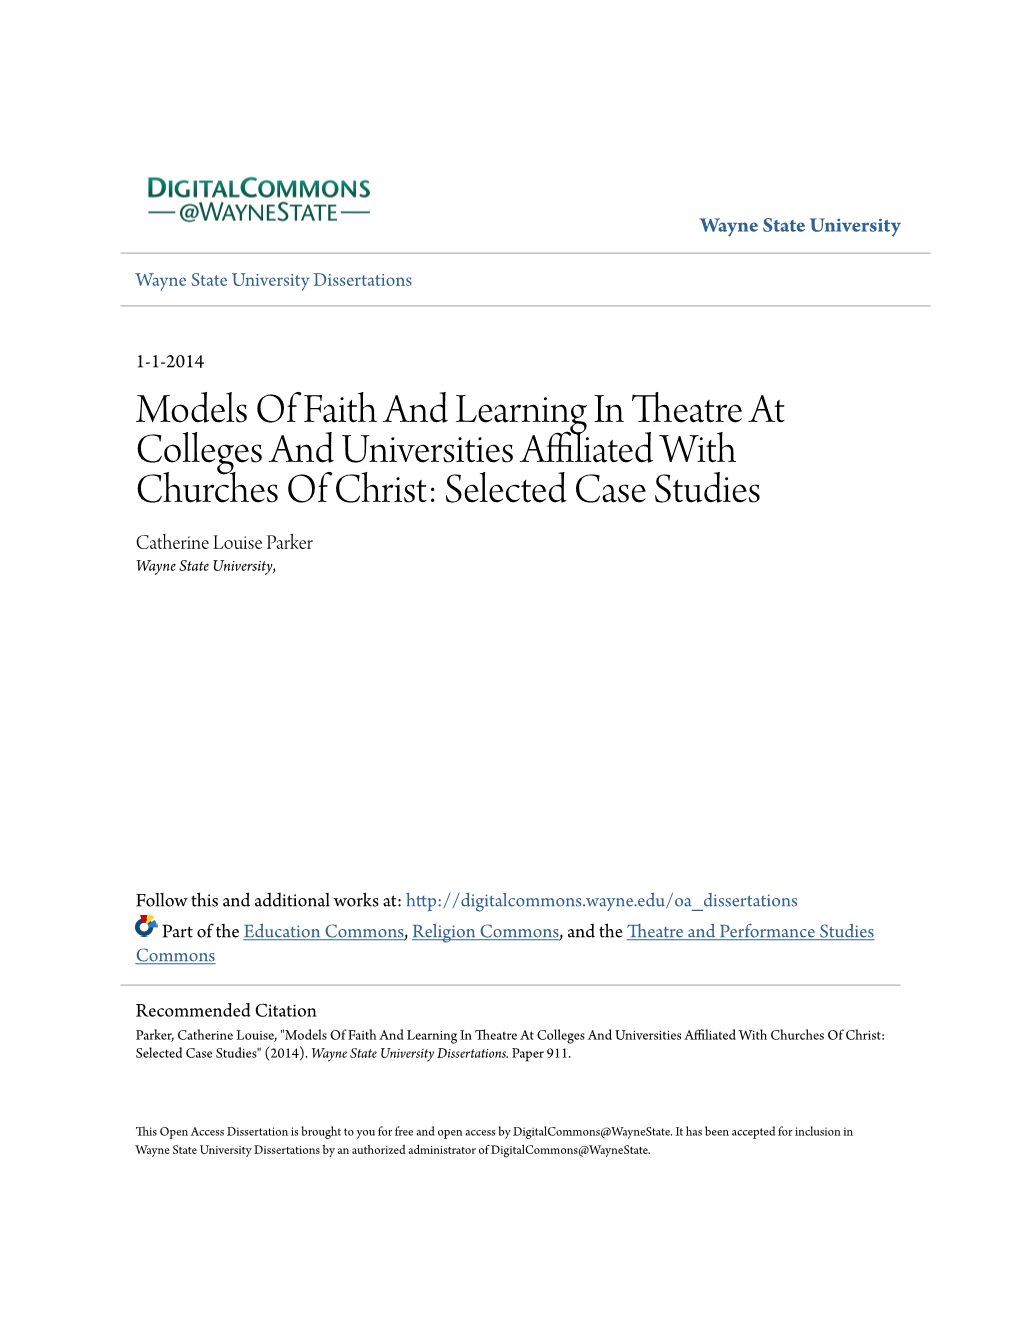 Models of Faith and Learning in Theatre at Colleges And